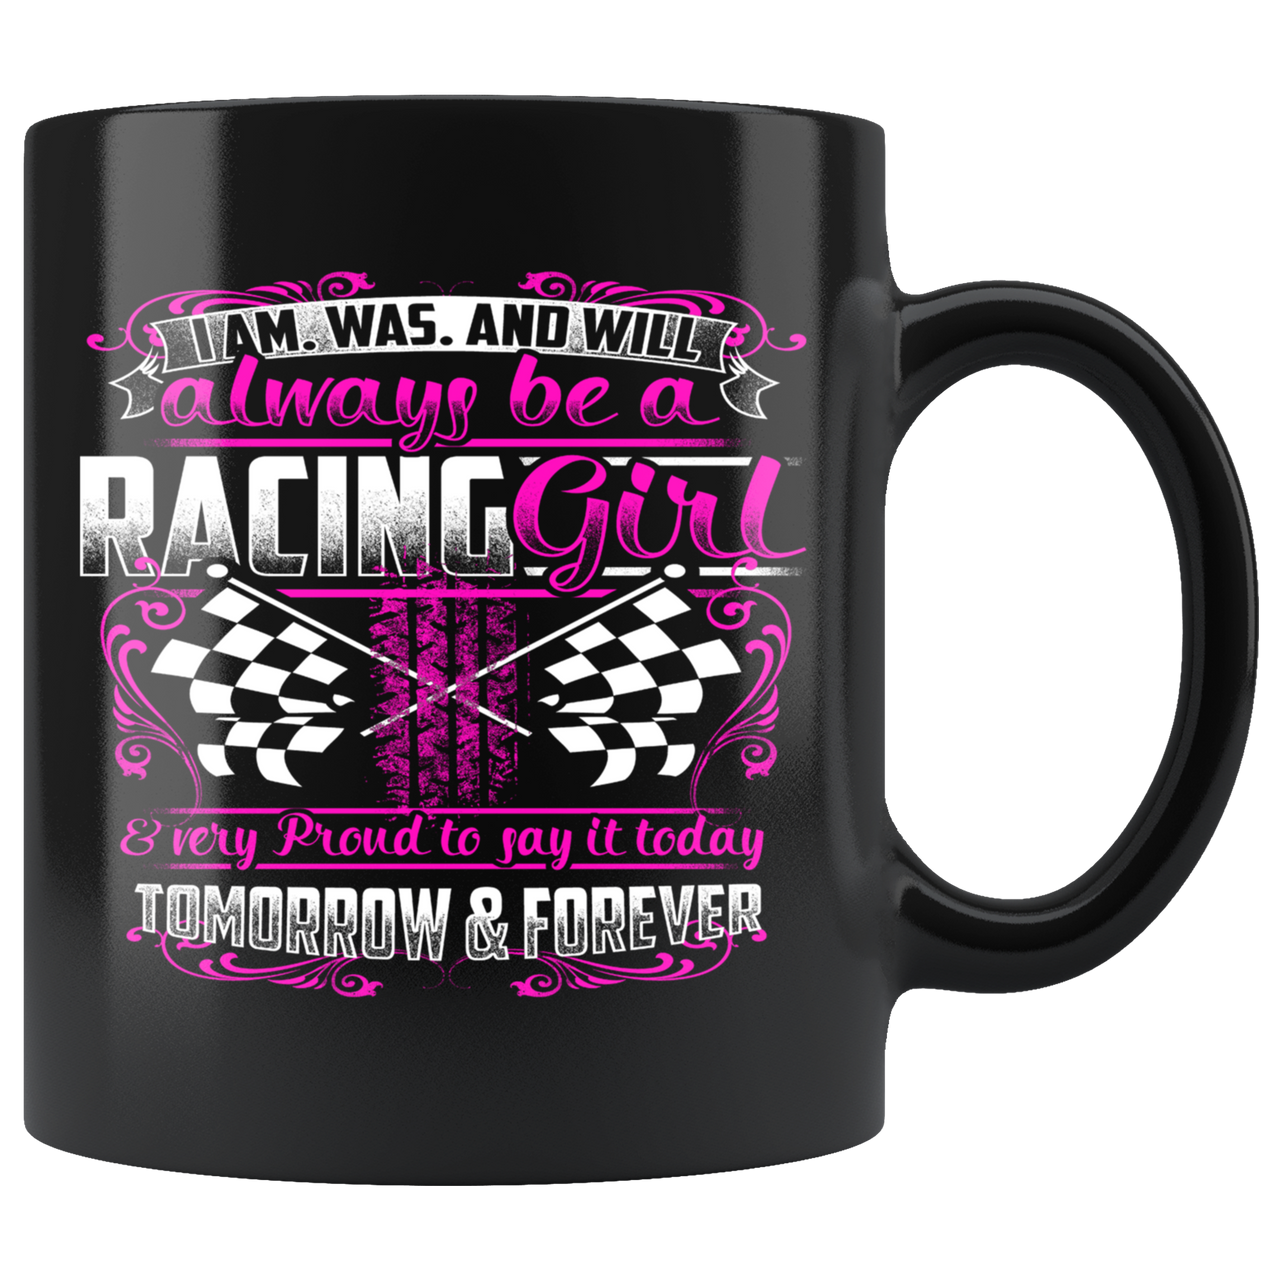 I'm Was And Will Always Be A Racing Girl Mug!